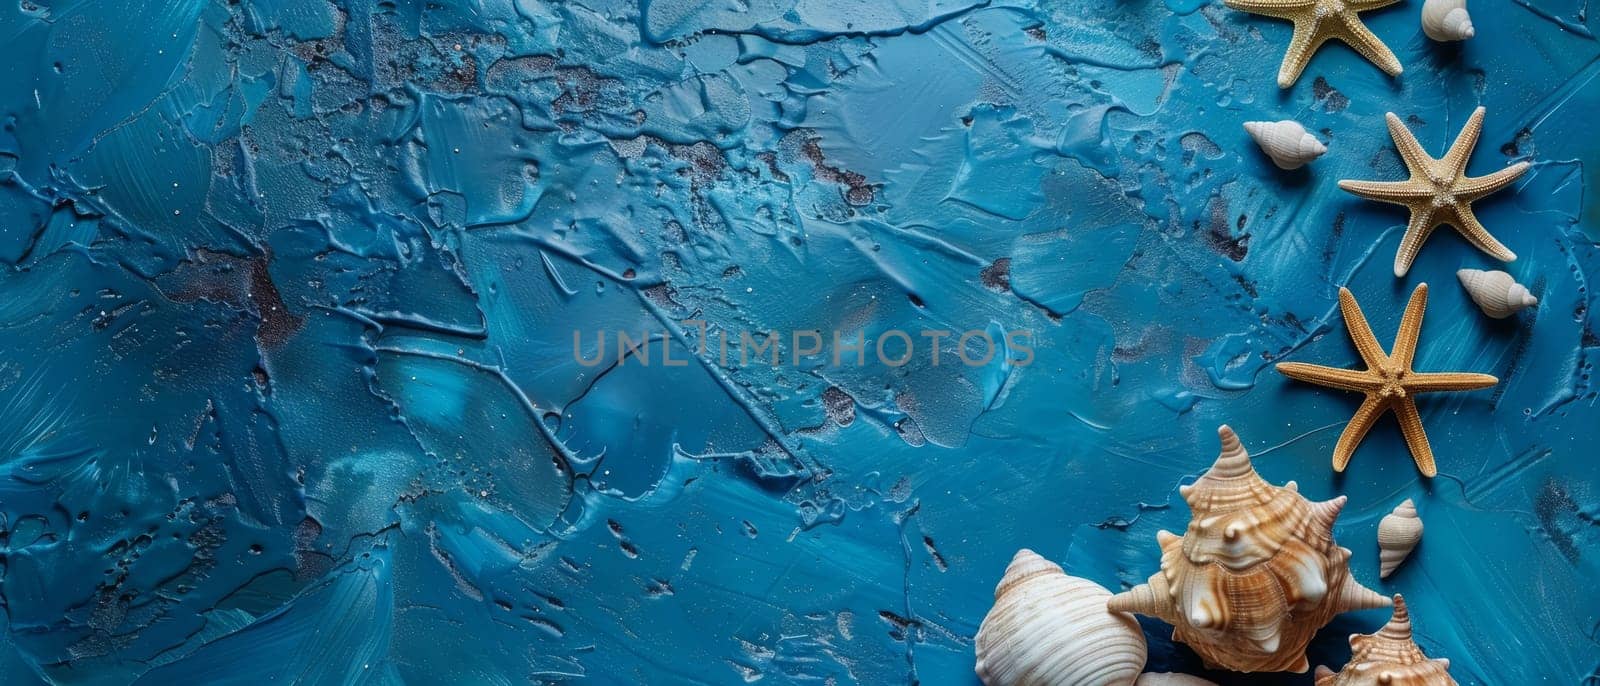 This stock image captures a calm seascape essence with scattered shells and starfish on a serene blue backdrop, designed for versatile use. Copy space for advertising, presentation product or text